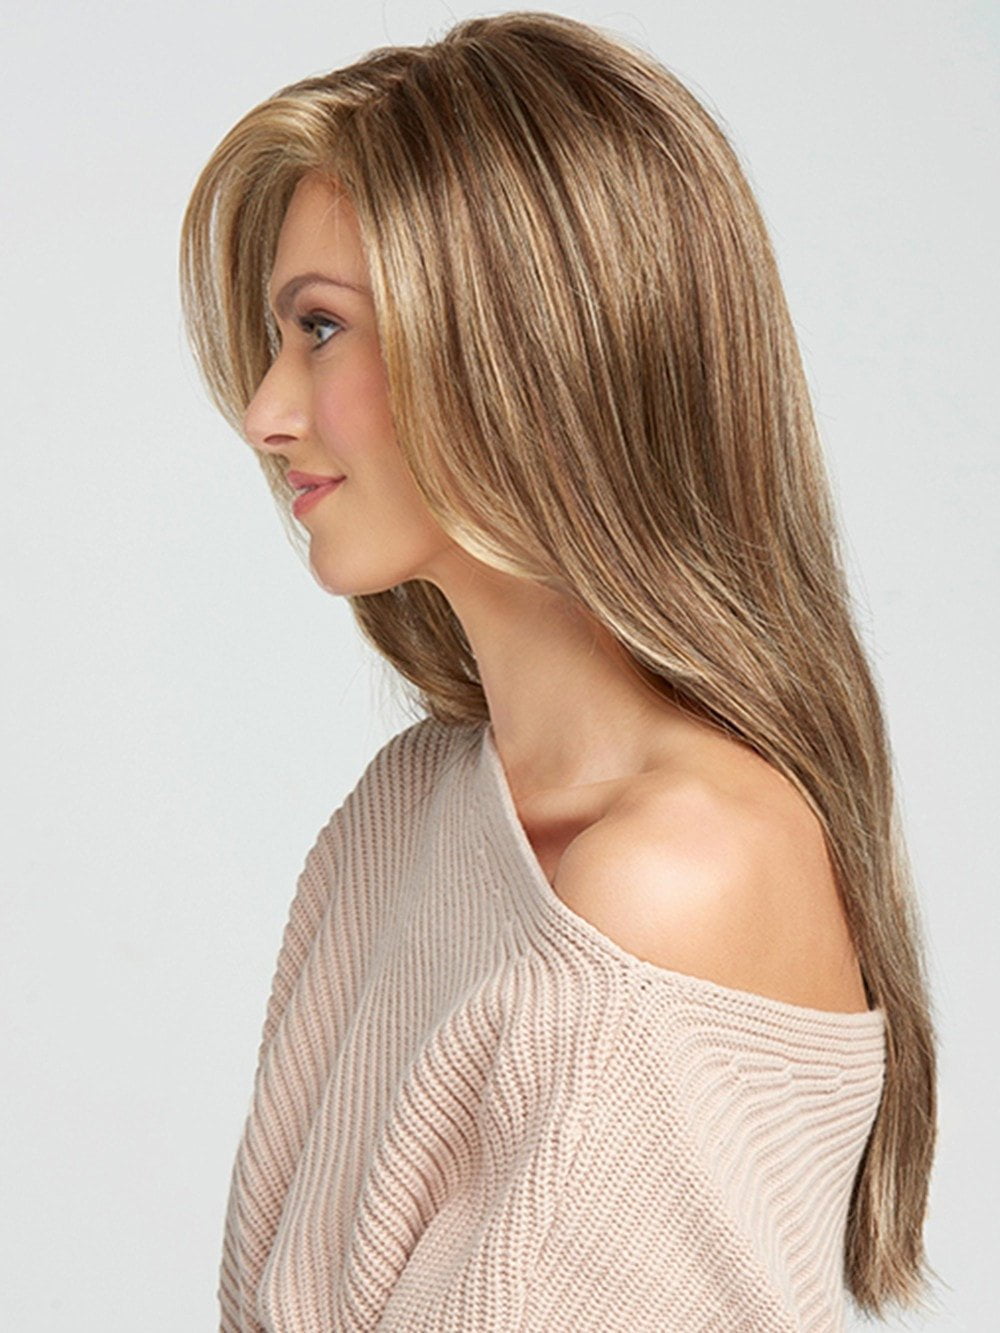 Beautiful long layers that fall to mid-back to create this full, flowing silhouette